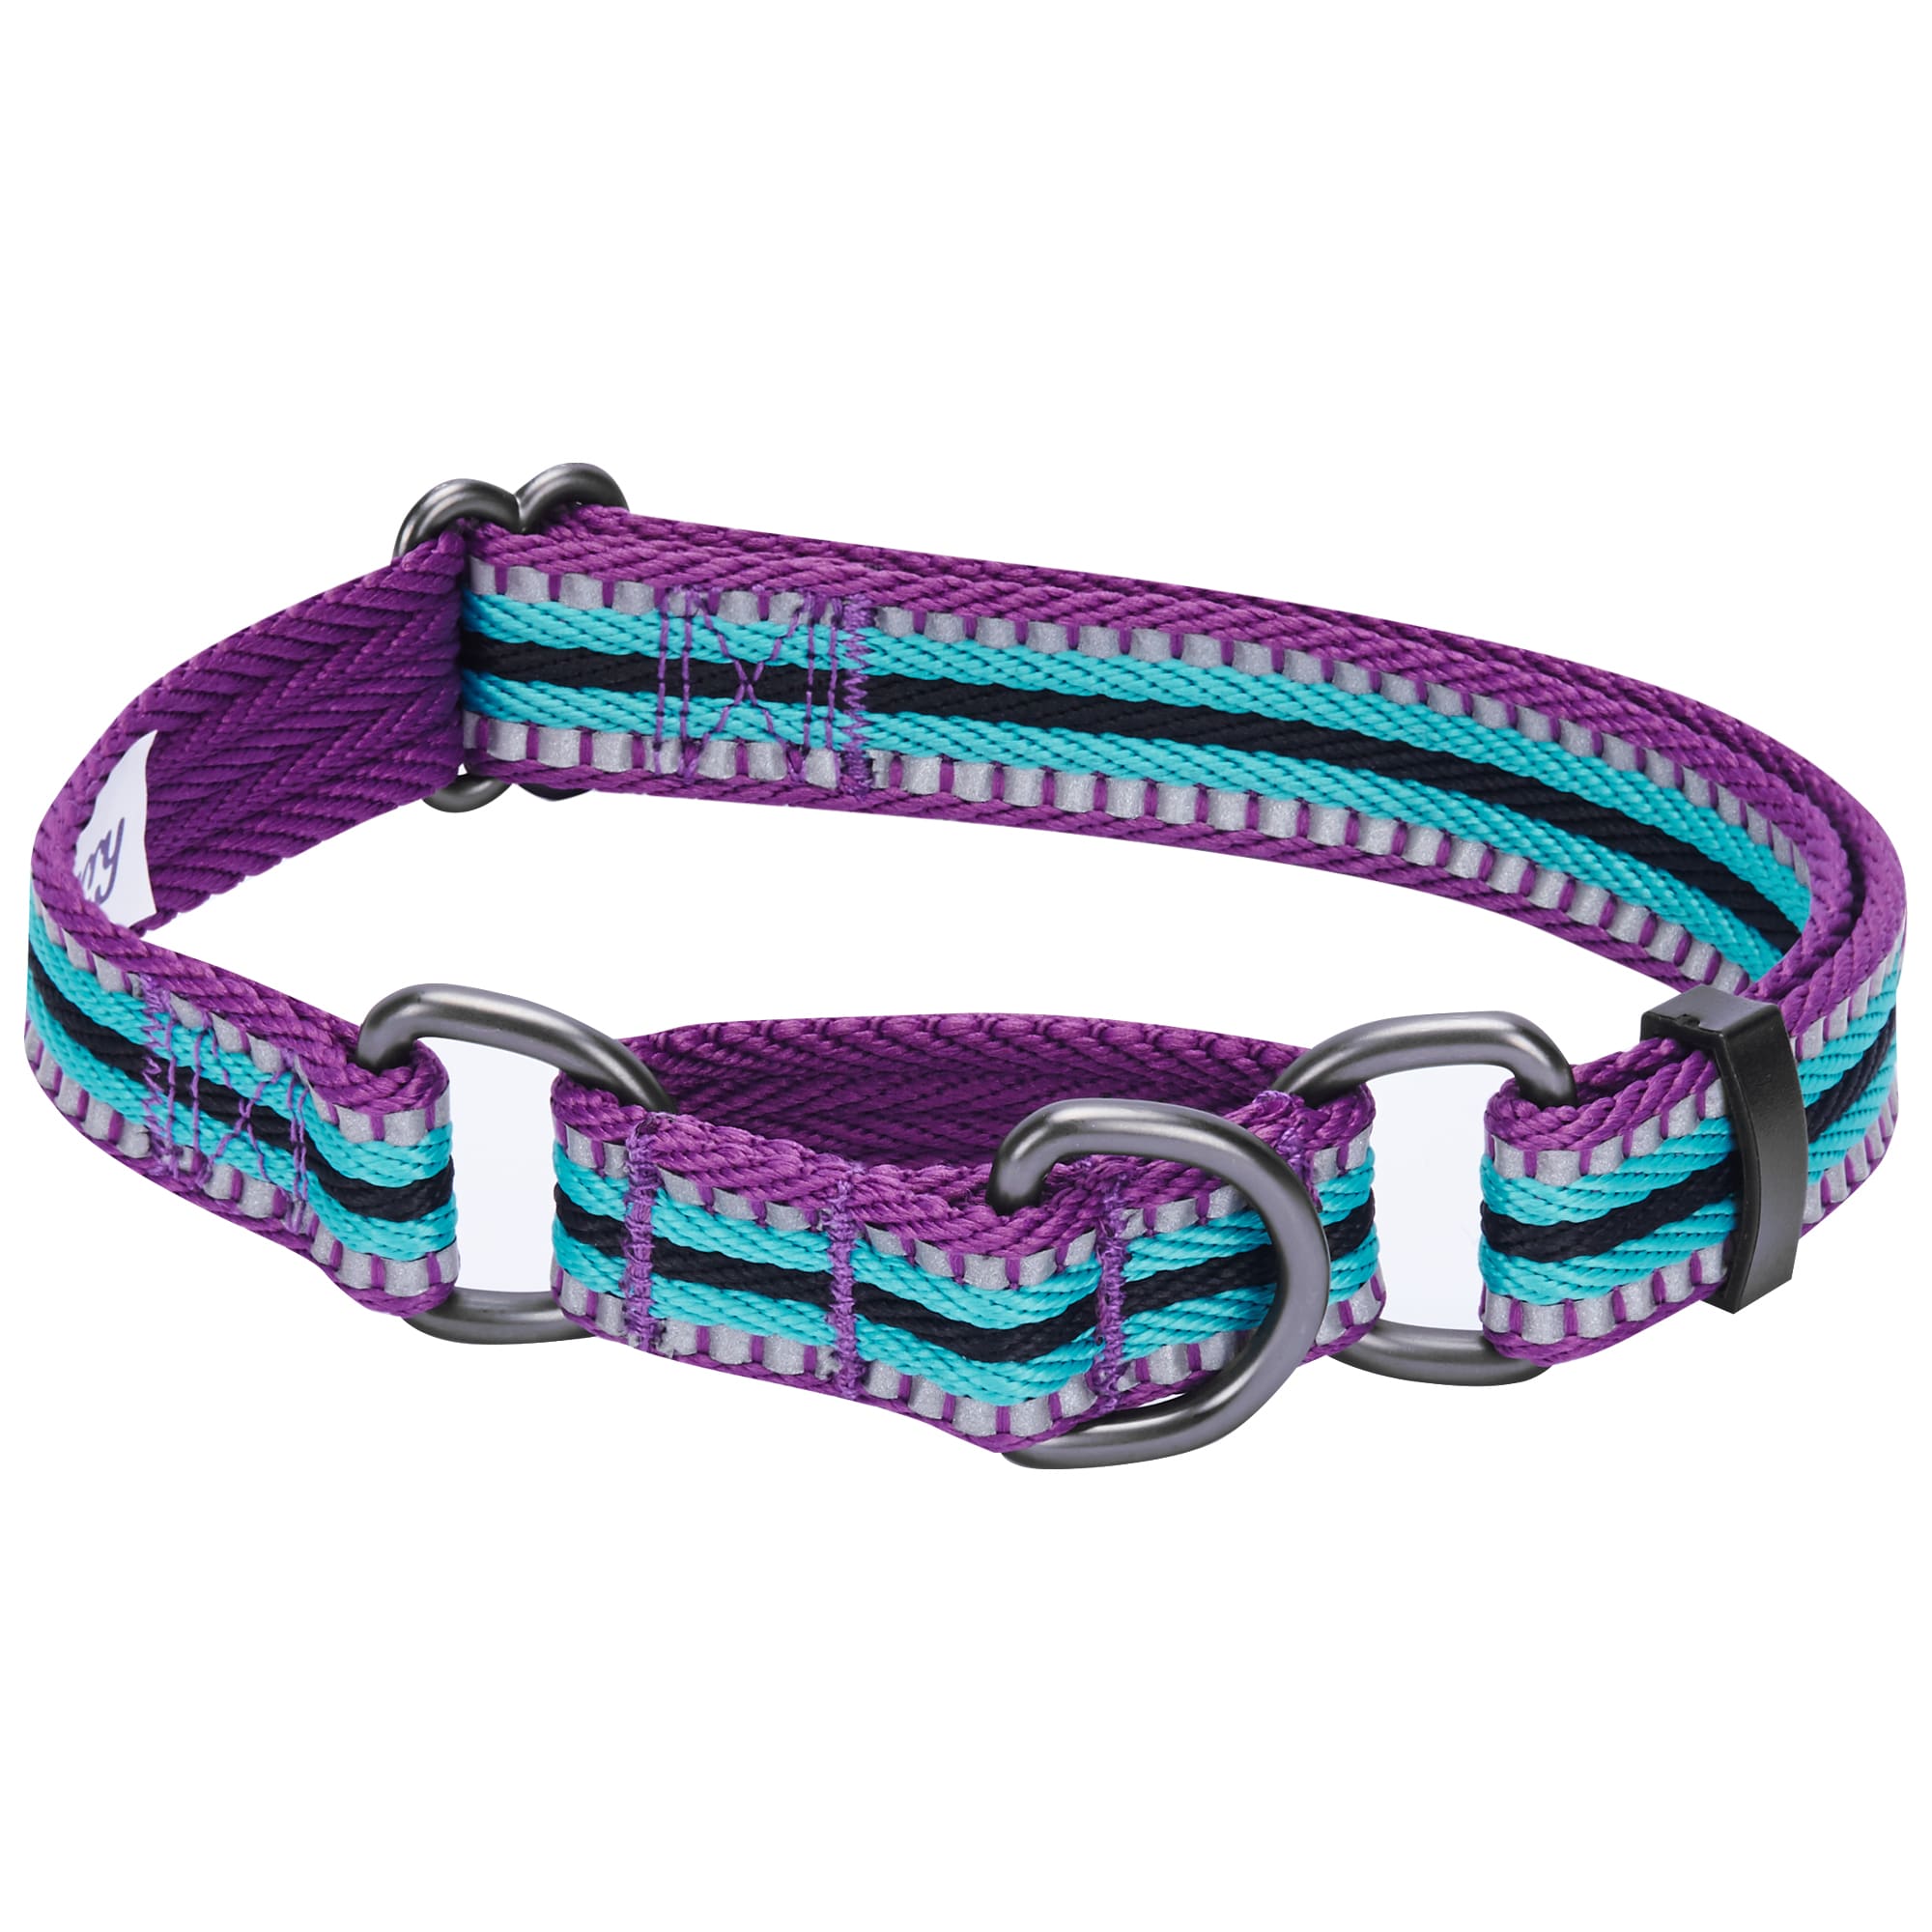 Neck 17-20.5 Blueberry Pet 9 Colors Soft & Safe 3M Reflective Jacquard Neoprene Padded Adjustable Dog Collar with Metal Buckle Teal Blue for Large Breed 